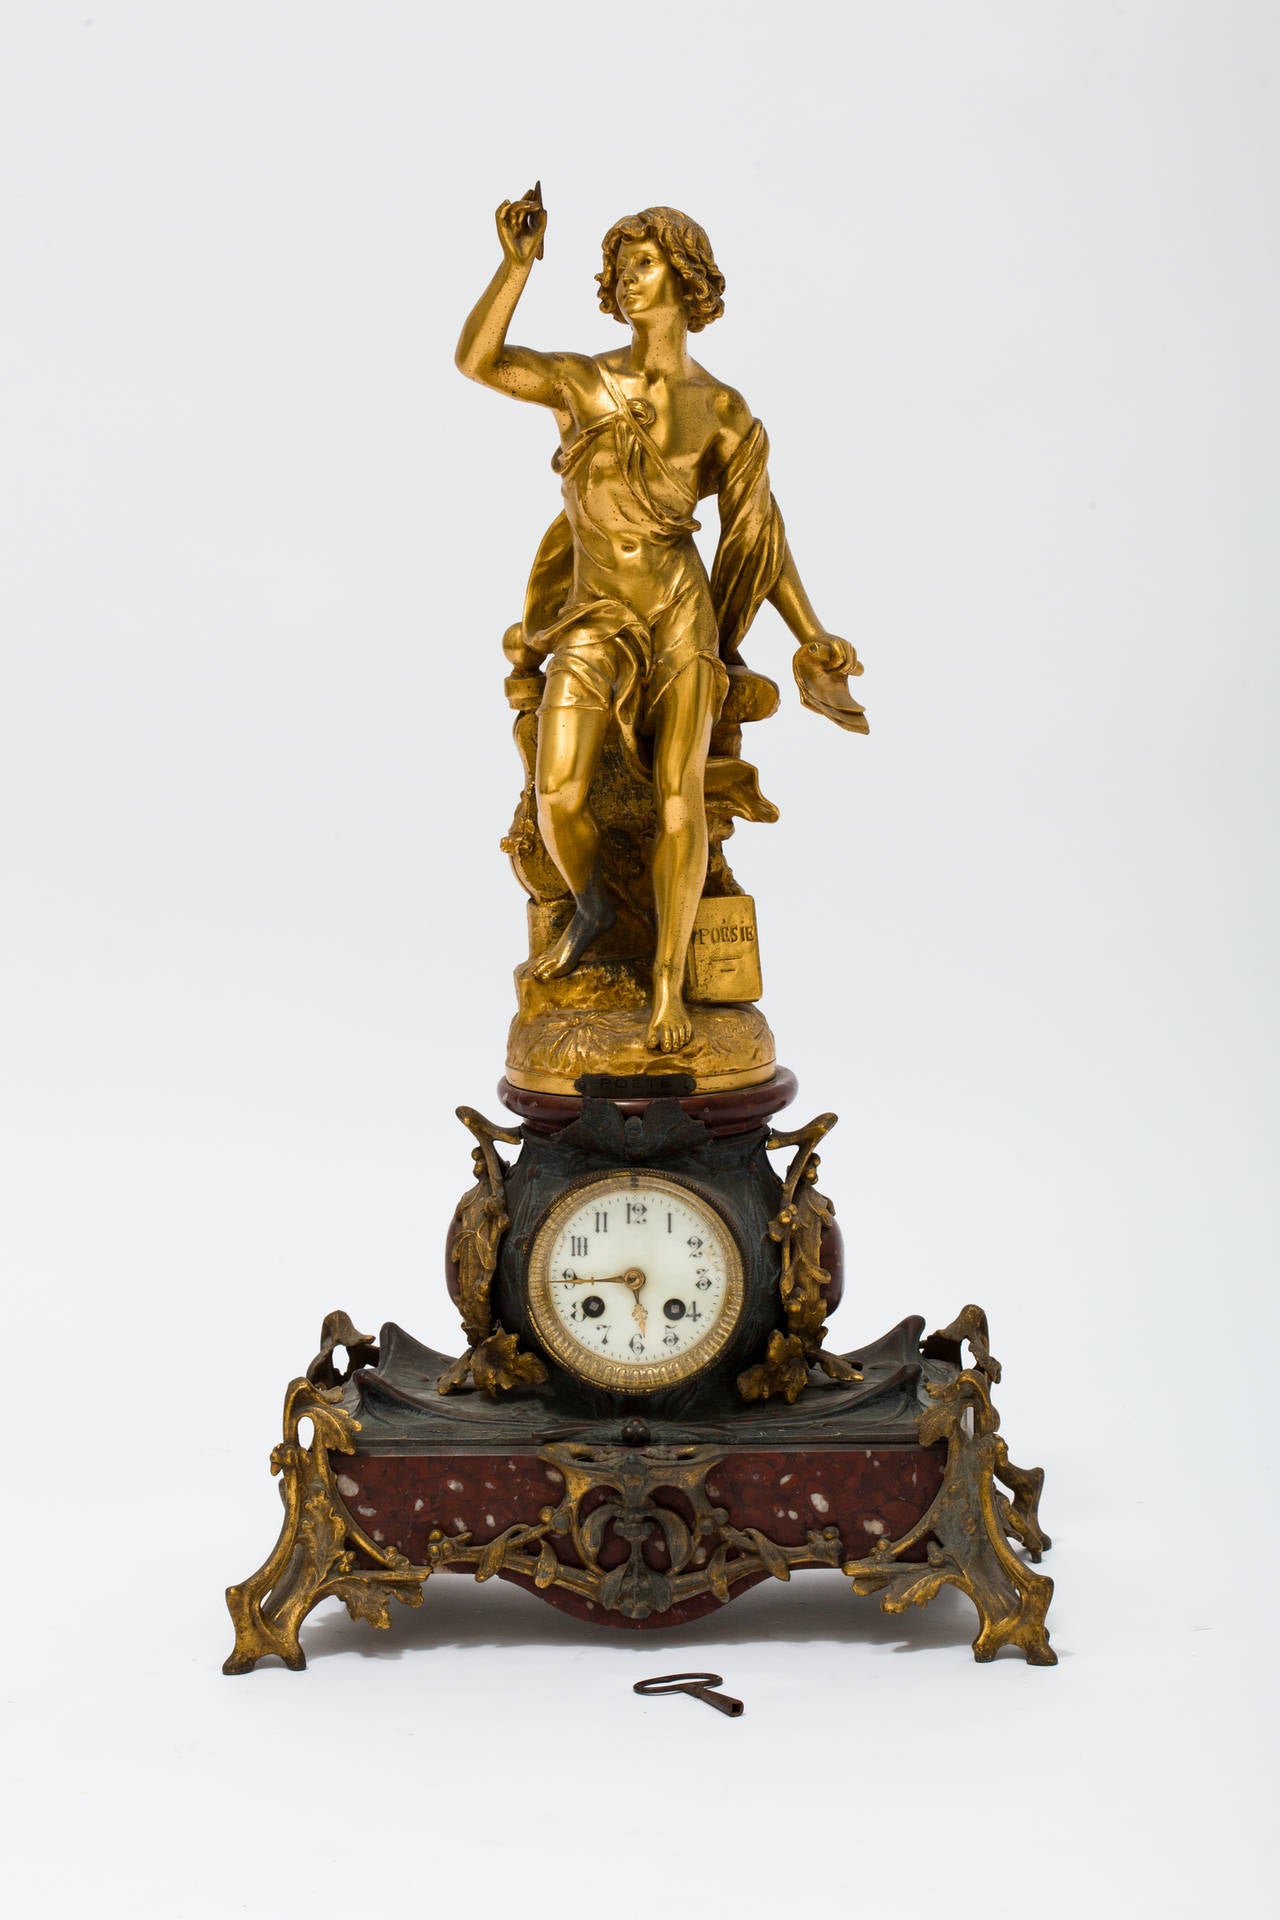 Gilt metal figure, signed Bruchon, on a clock base. Clock is not working